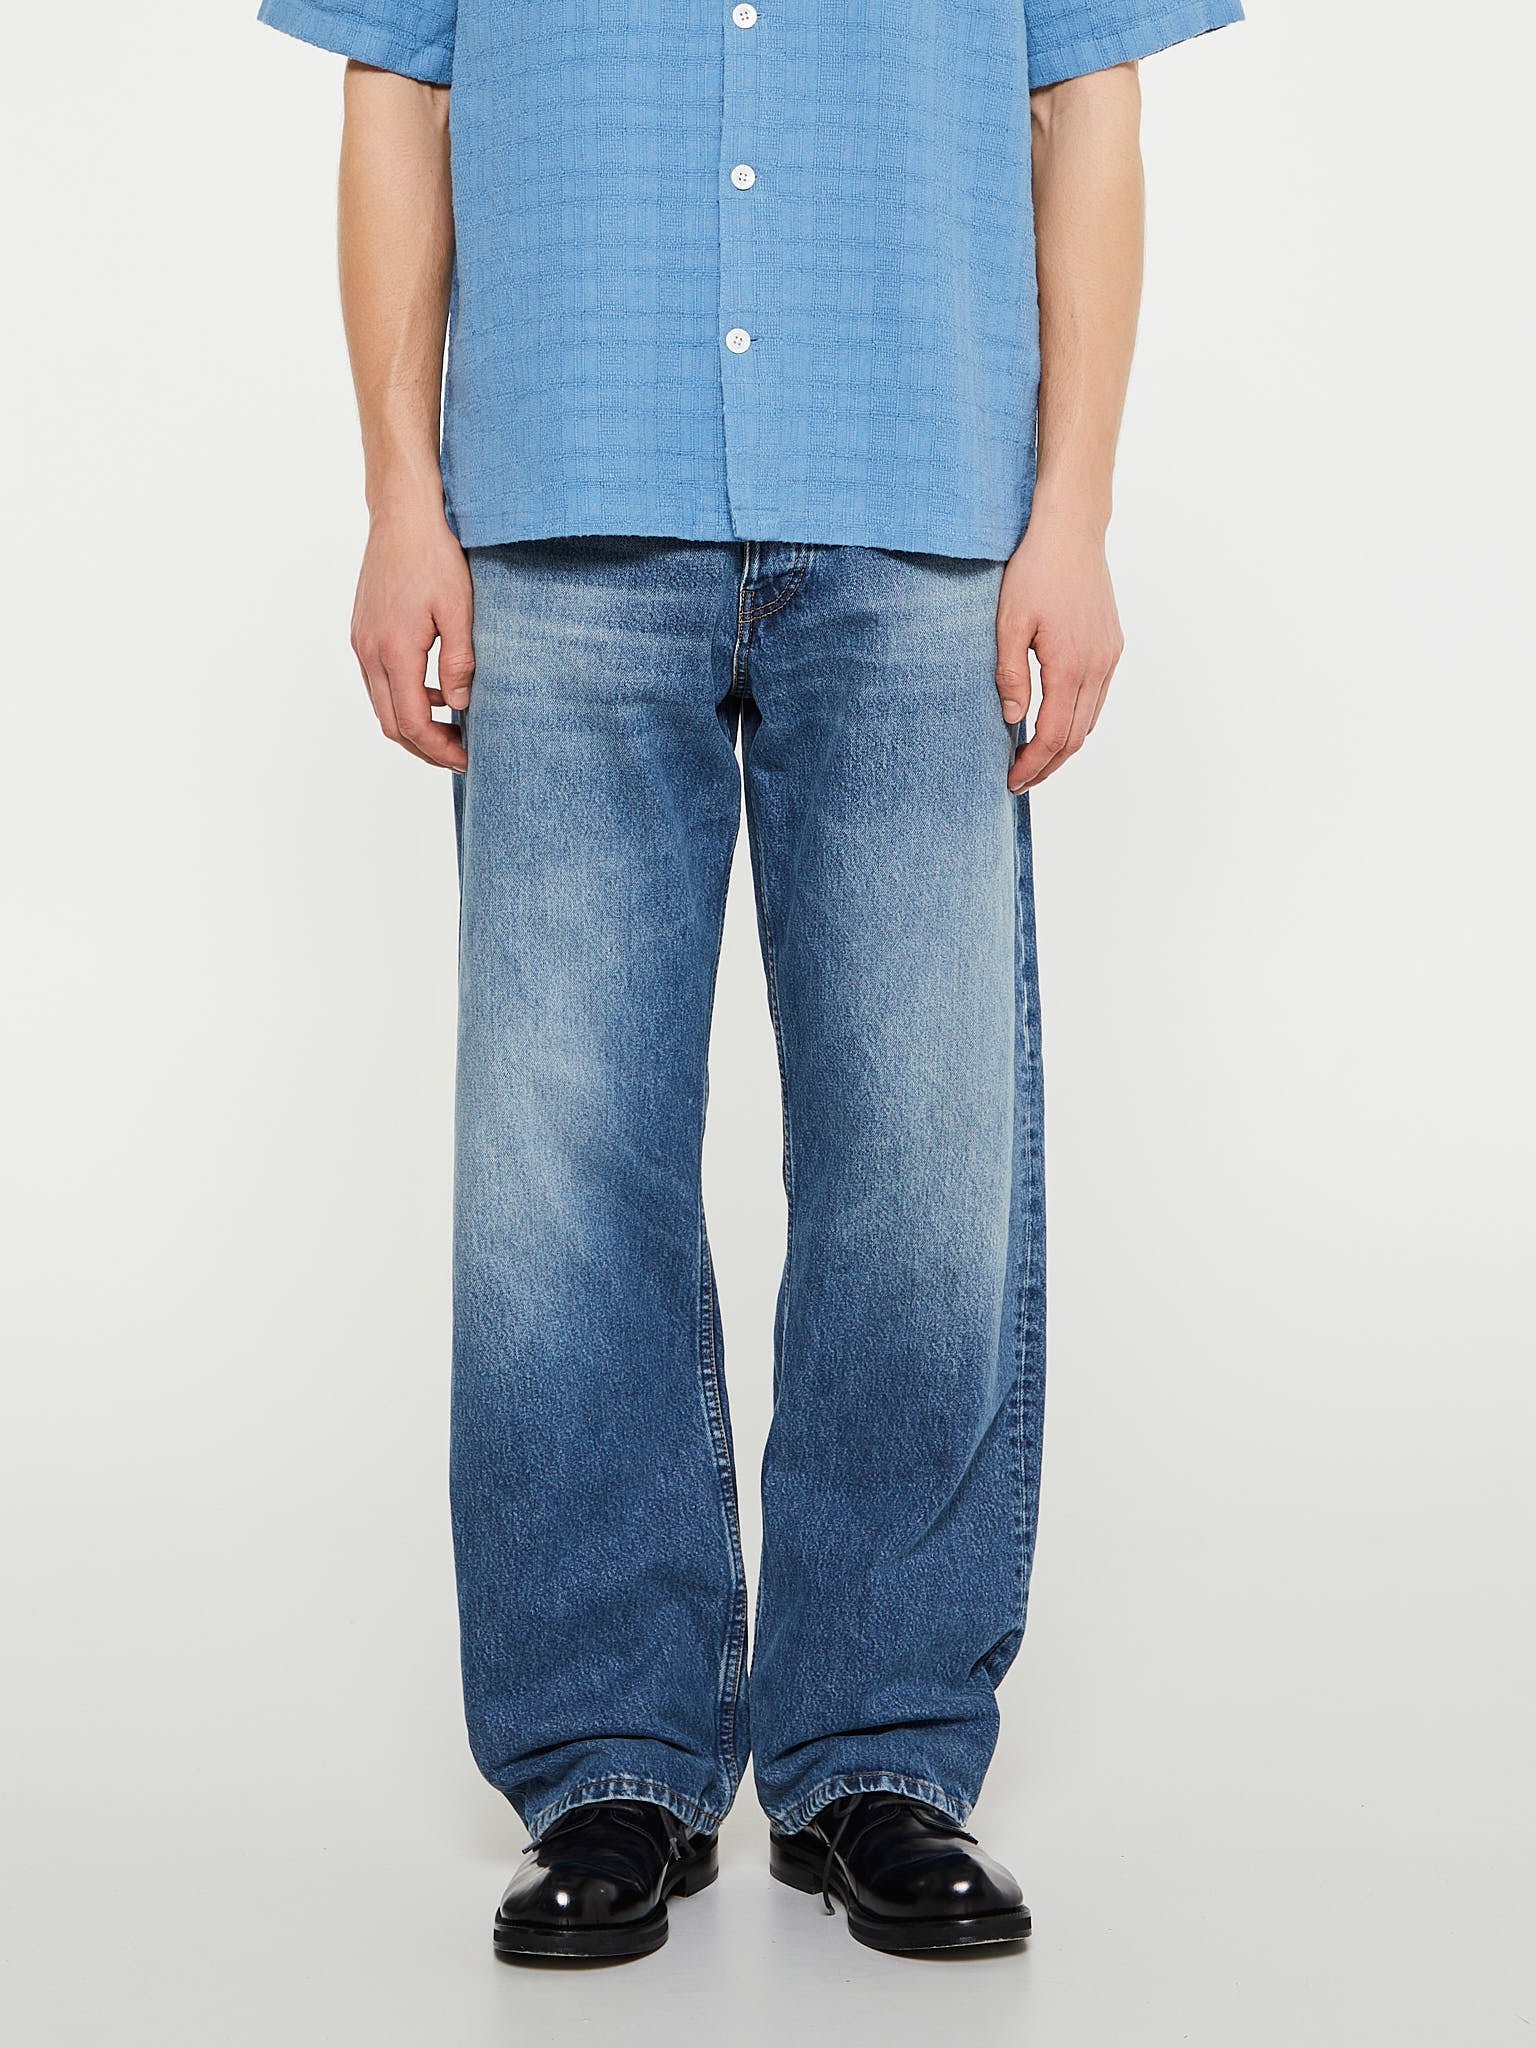 Sunflower - Loose Jeans in Mid Blue